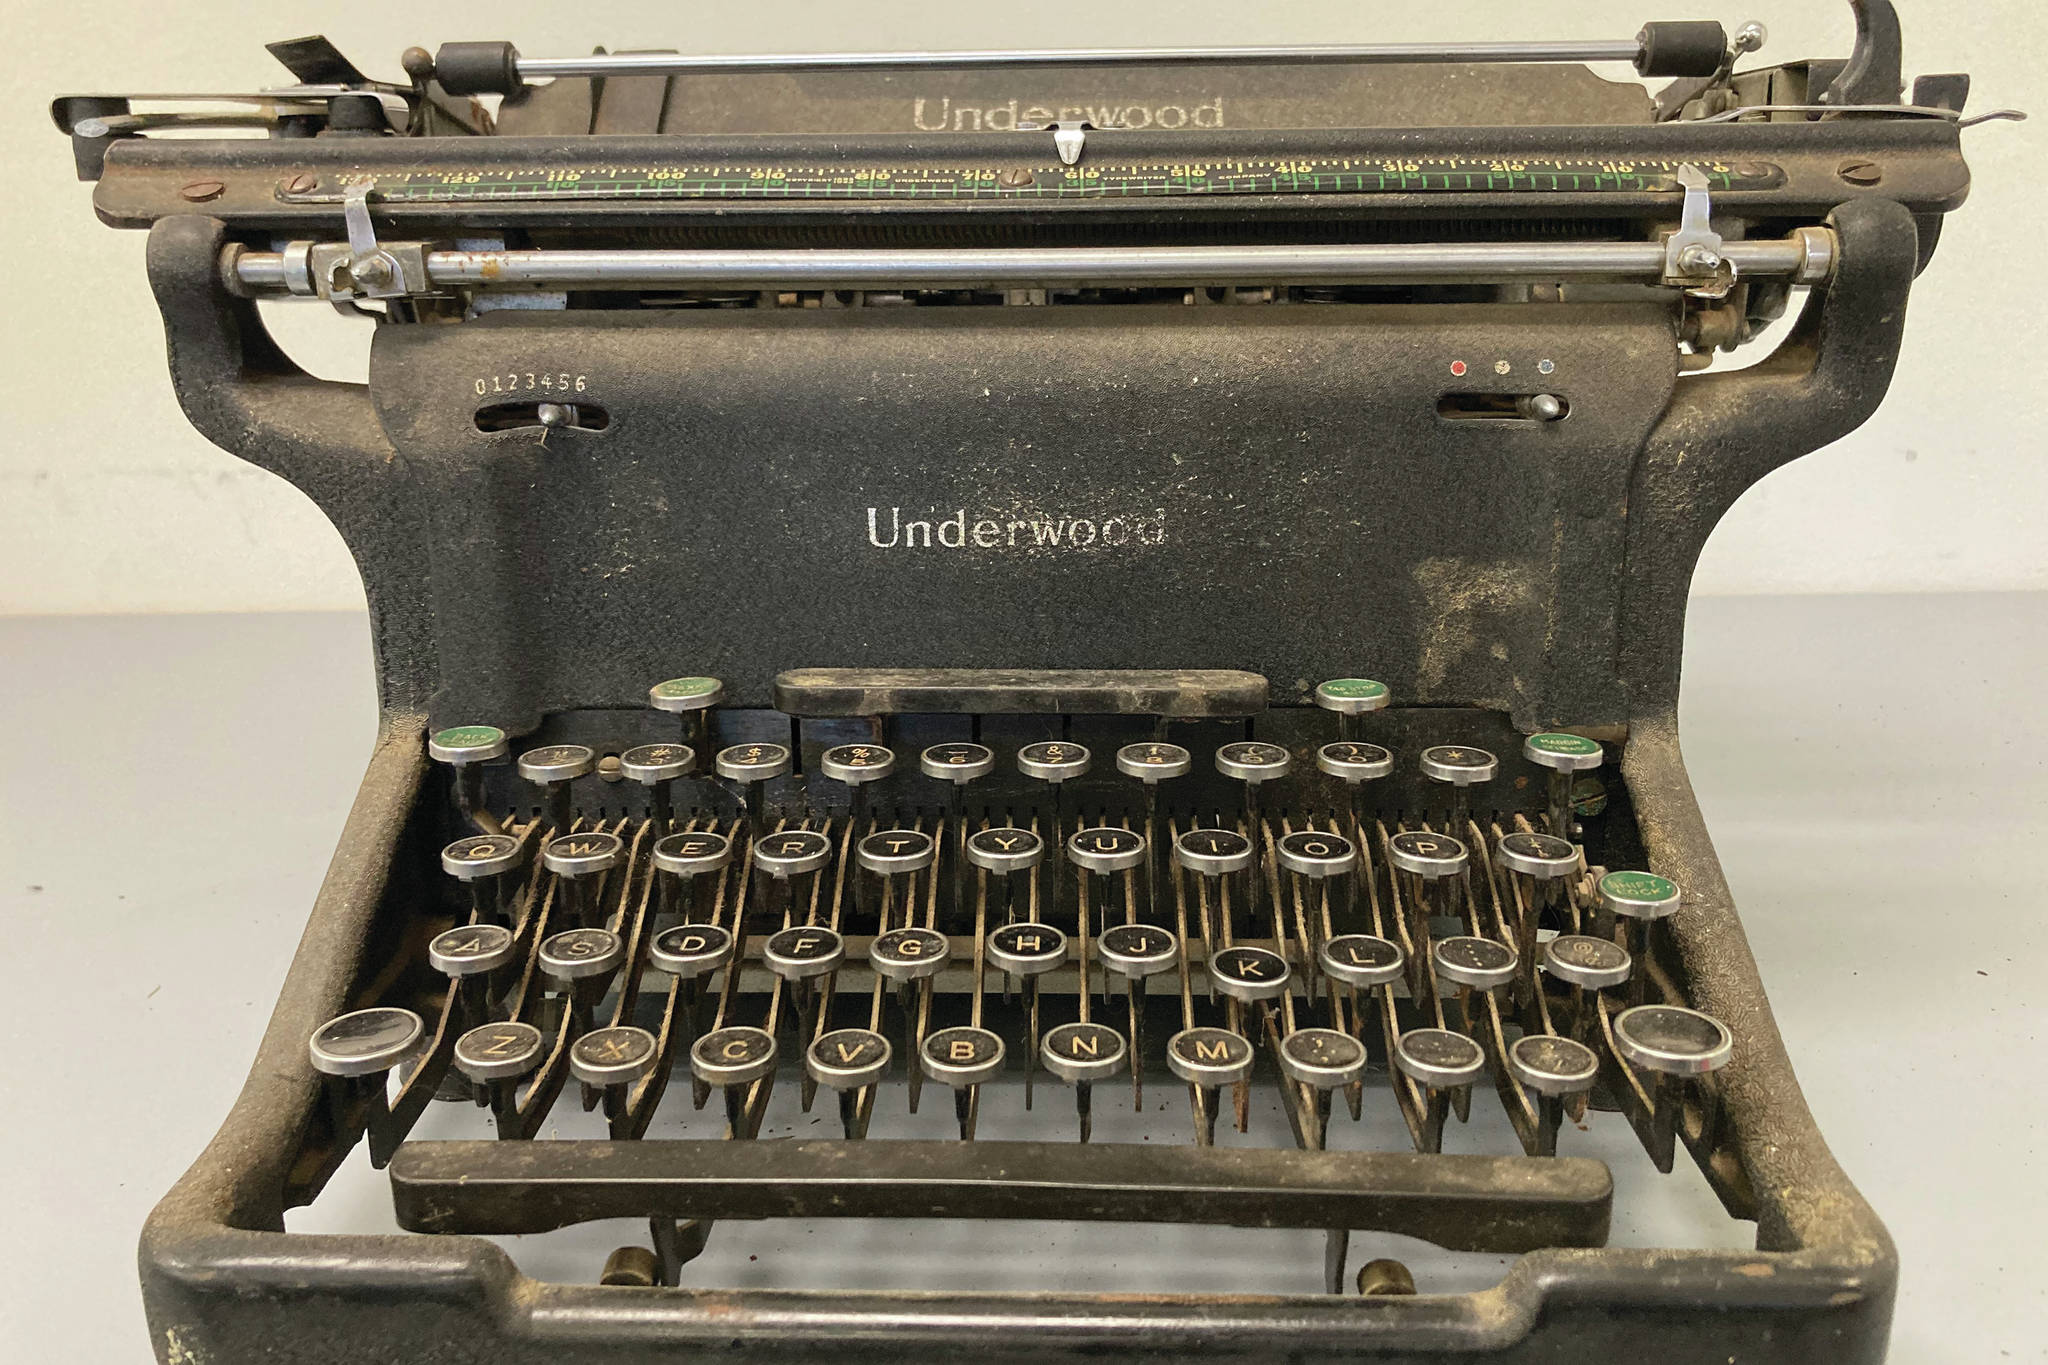 A vintage Underwood typewriter is seen on Jan. 28, 2021, at the Homer News in Homer, Alaska. An anonymous donor left the typewriter at the Homer News with a note saying it was used to type the first edition of the Homer News in January 1964, but this has not been verified. (Photo by Michael Armstrong/Homer News)